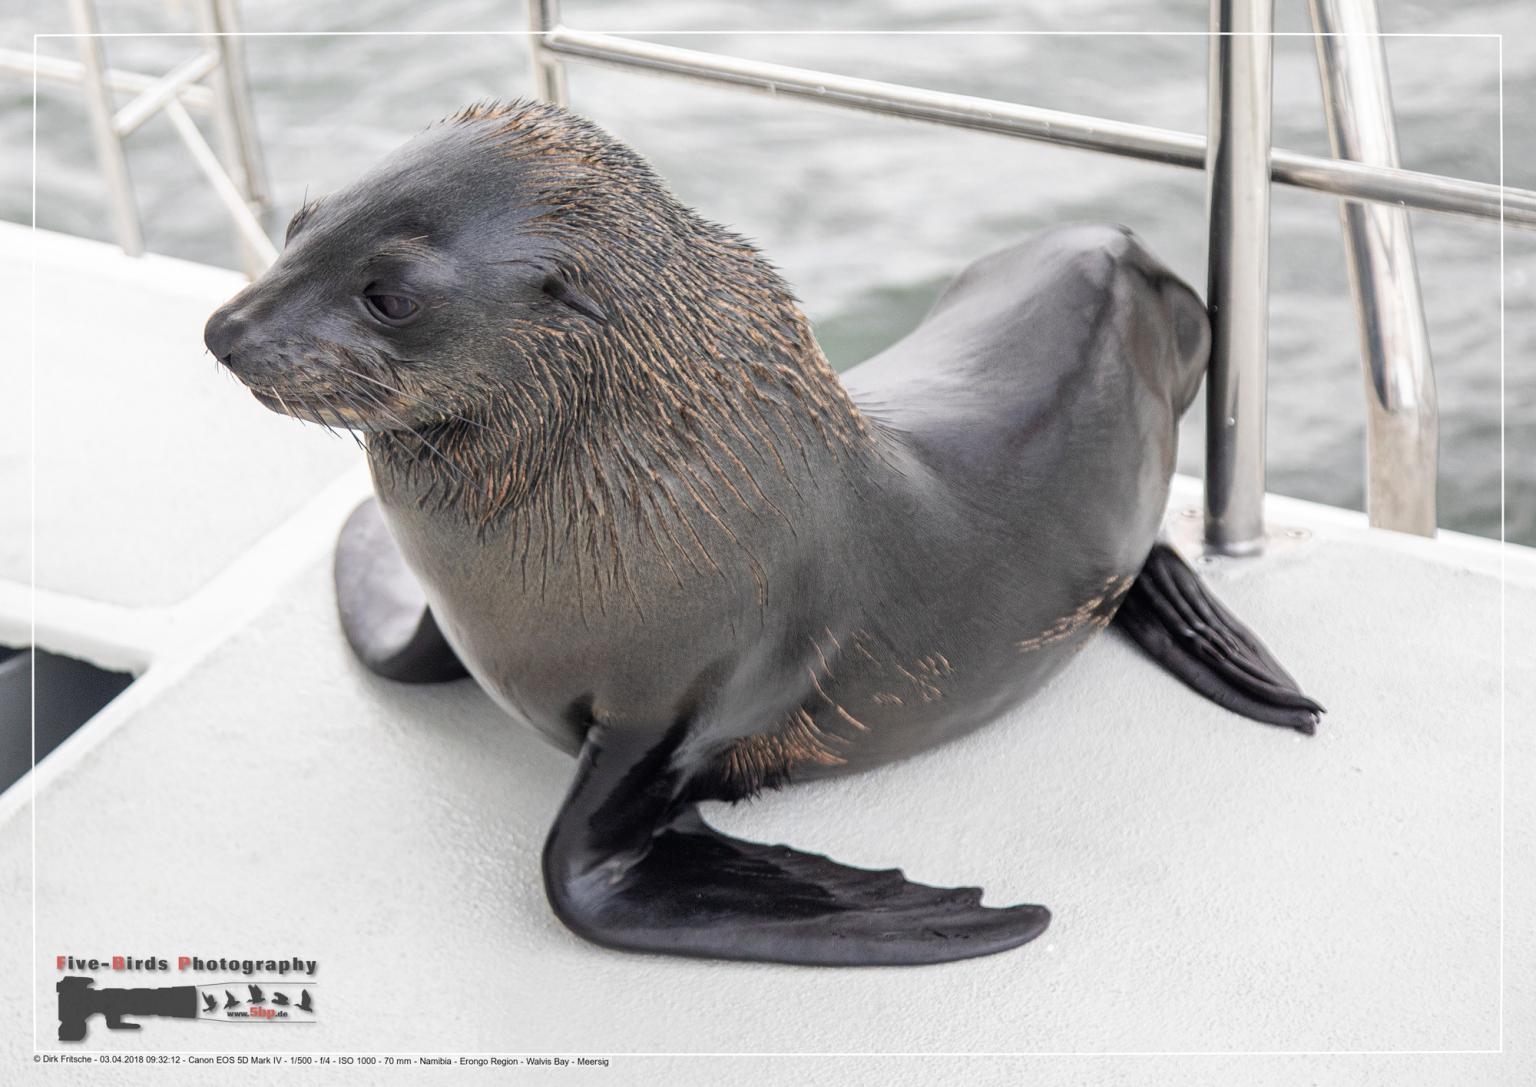 A Cape Fur Seals on a boat at the Atlantic Ocean near Walfis Bay in western Namibia